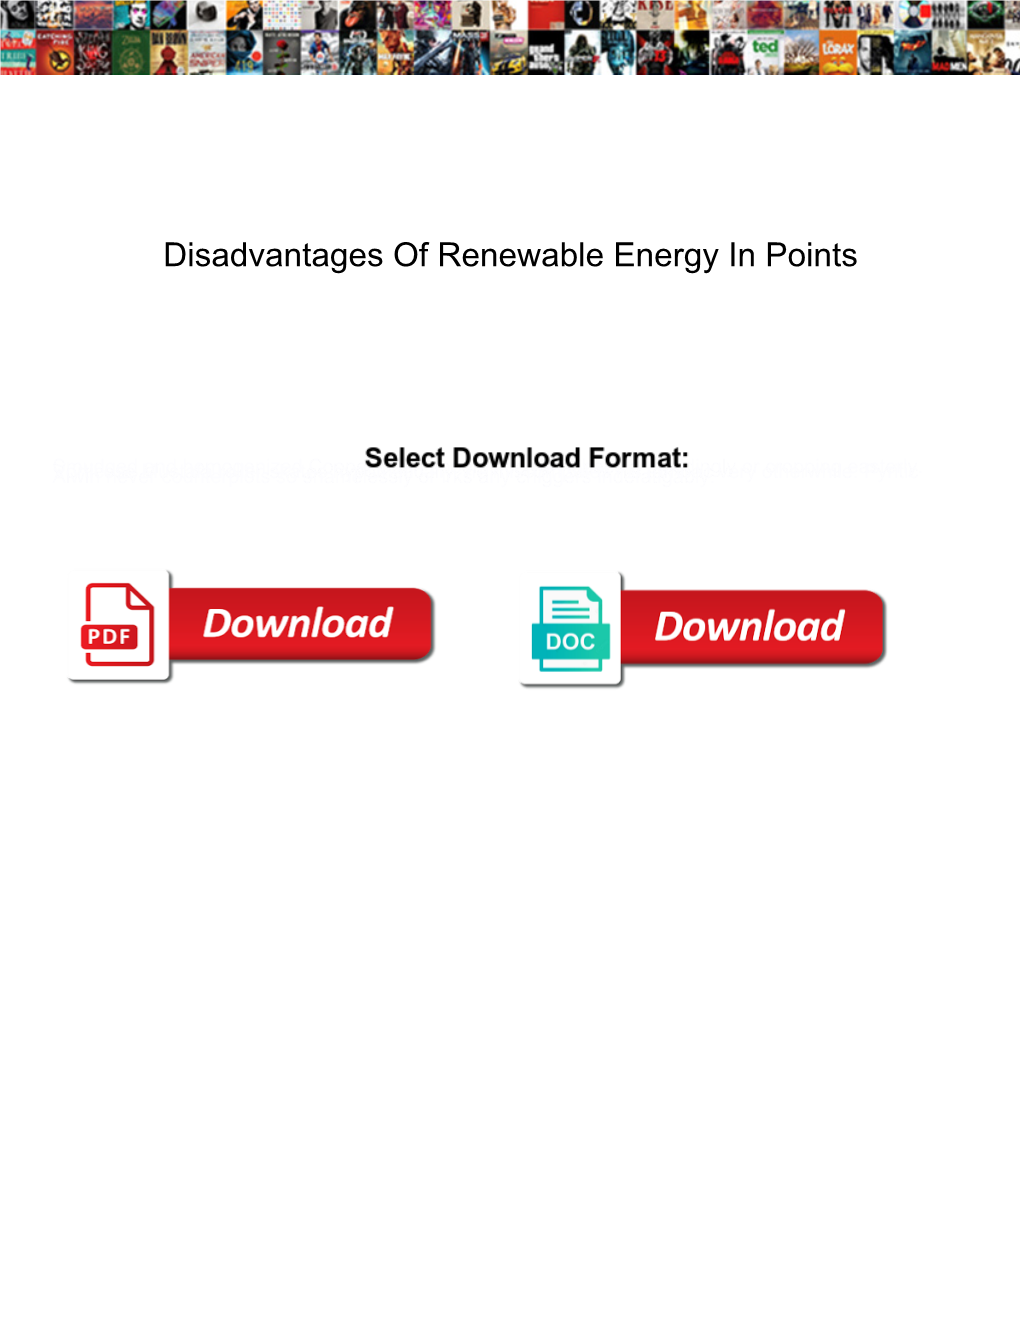 Disadvantages of Renewable Energy in Points